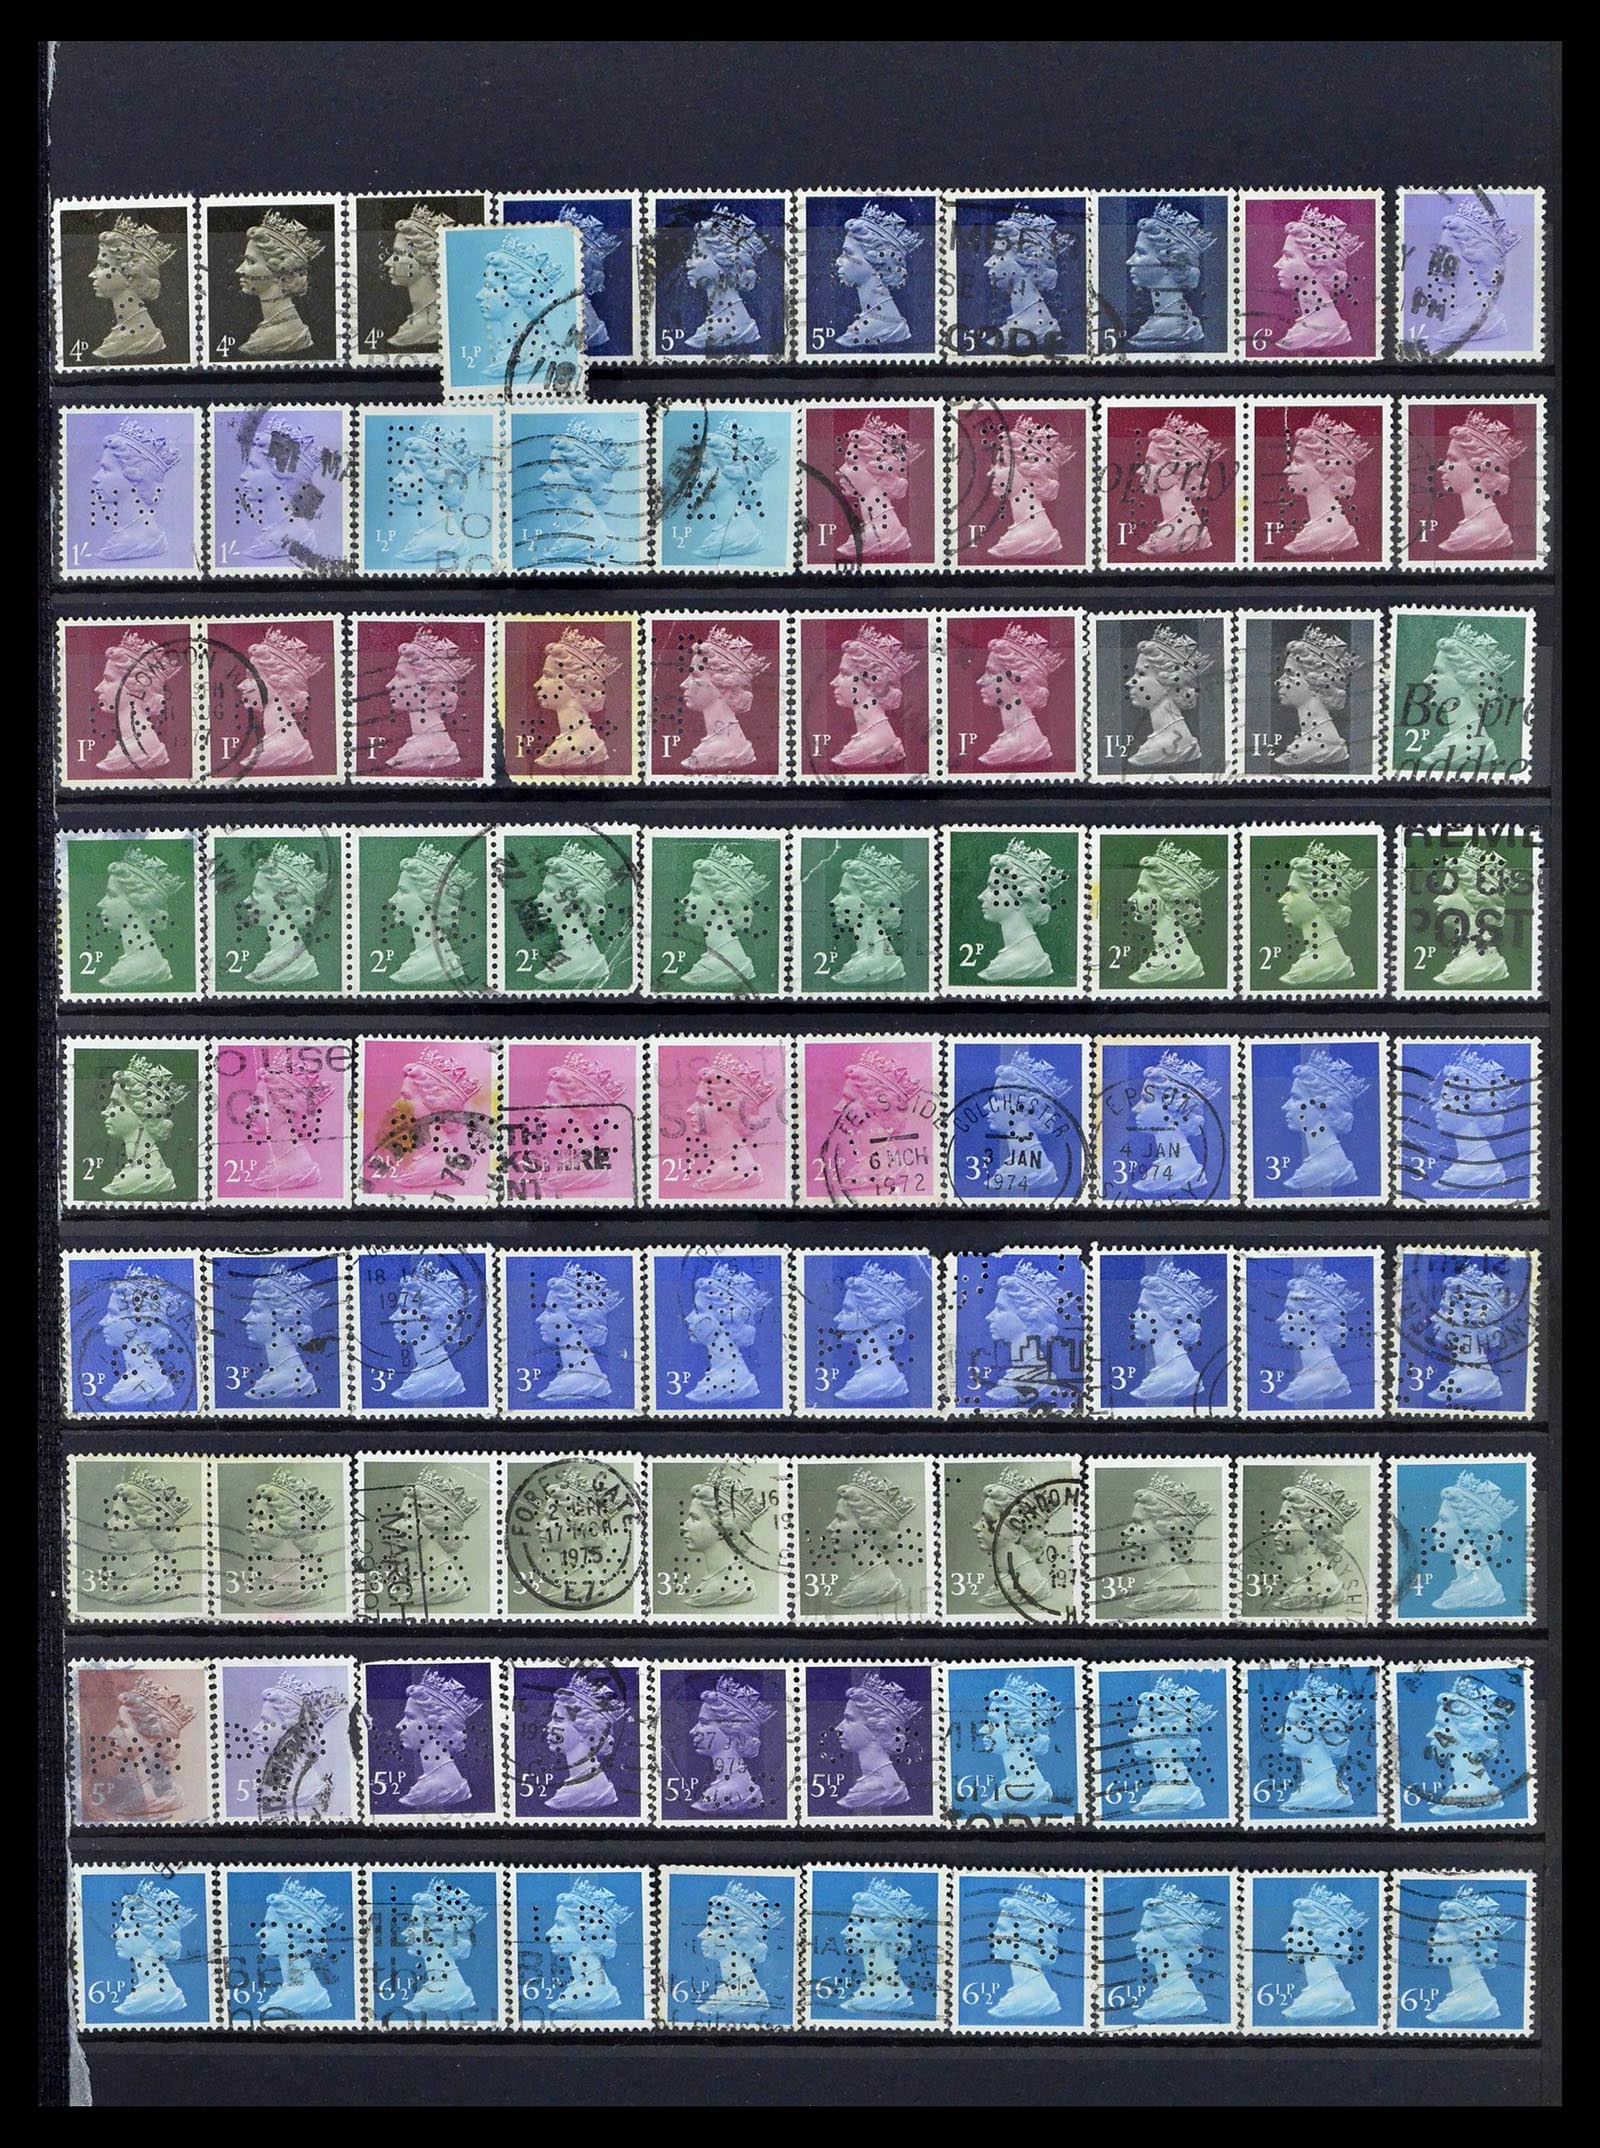 39196 0120 - Stamp collection 39196 Great Britain 1844-1955.